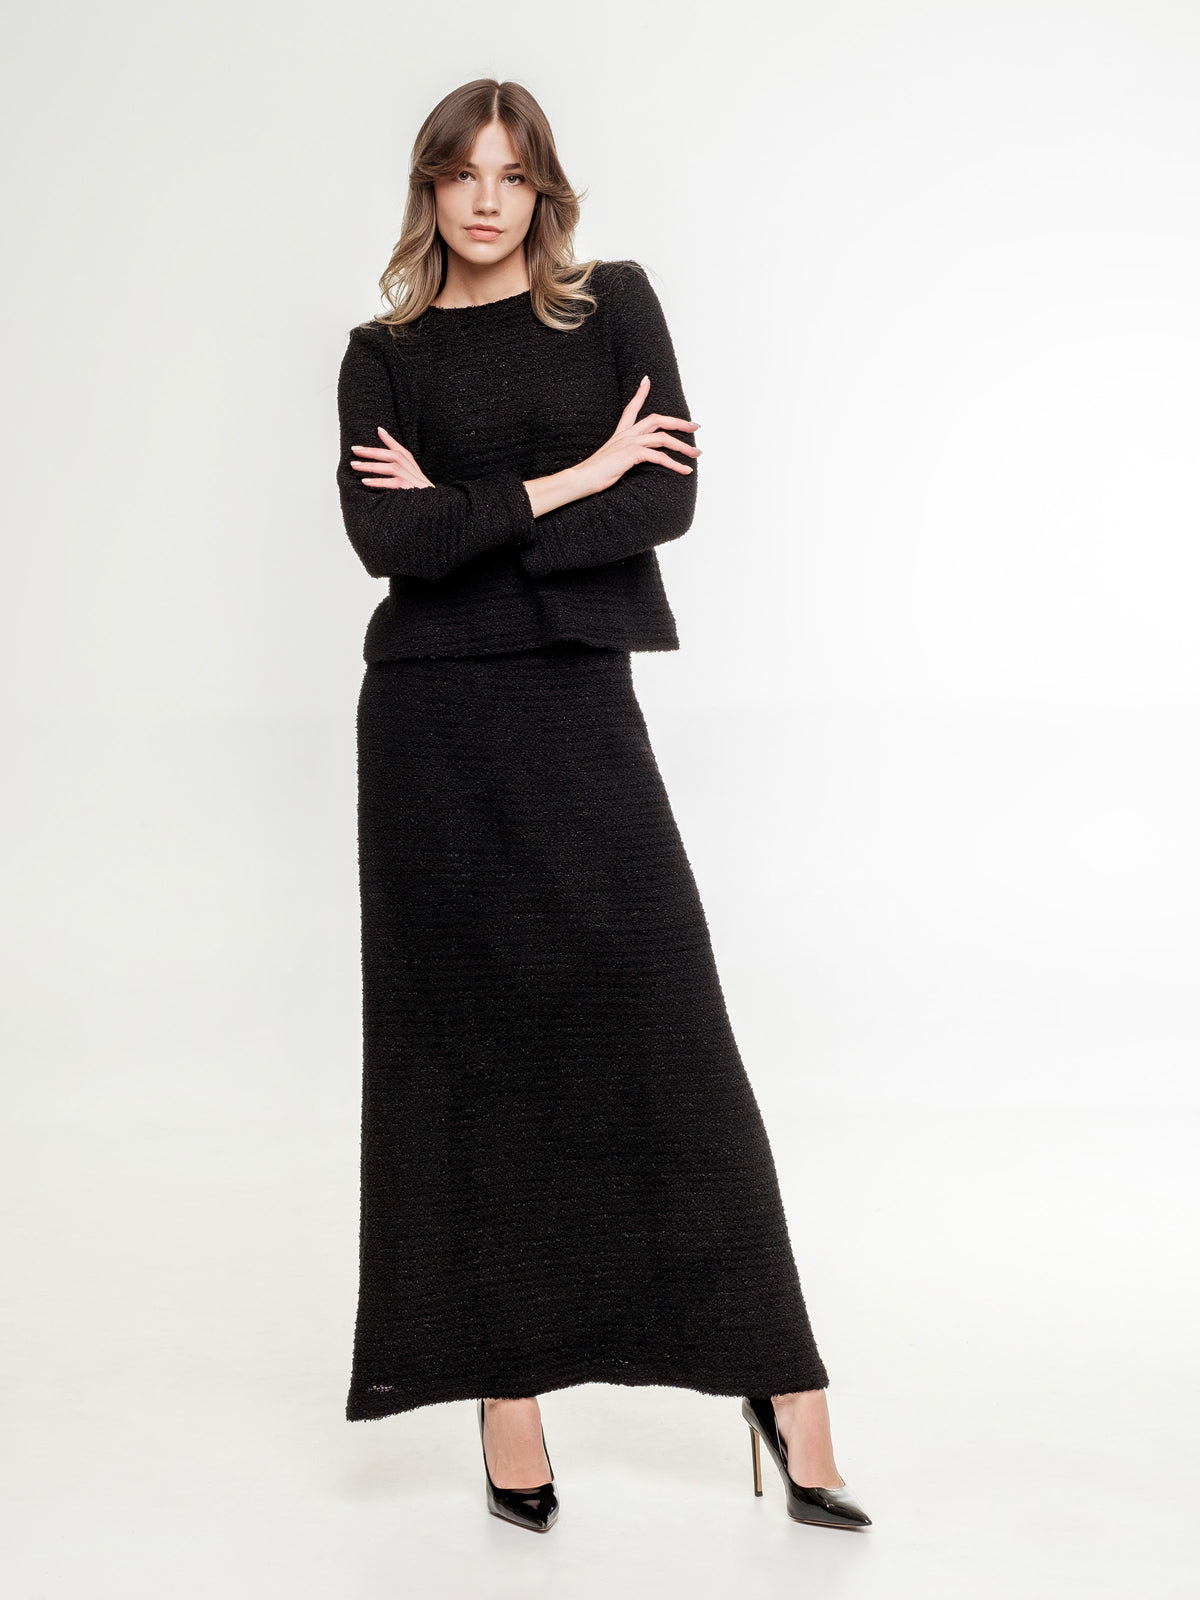 black_textured_top_with_long_sleeves and long skirt on the model